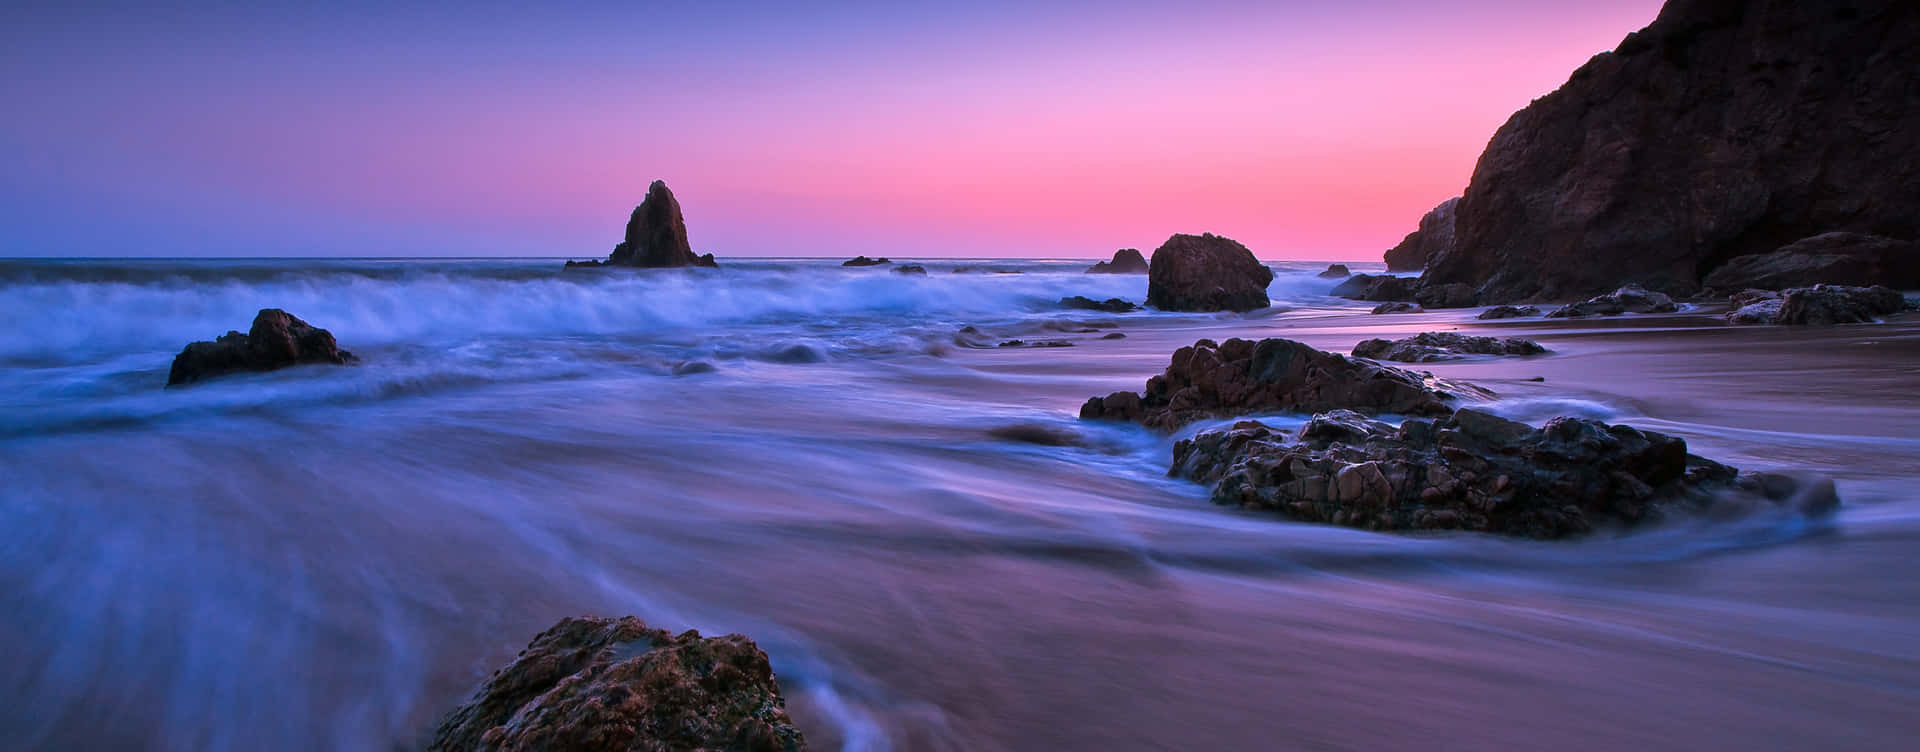 Take in the beauty of a blue and purple sunset Wallpaper